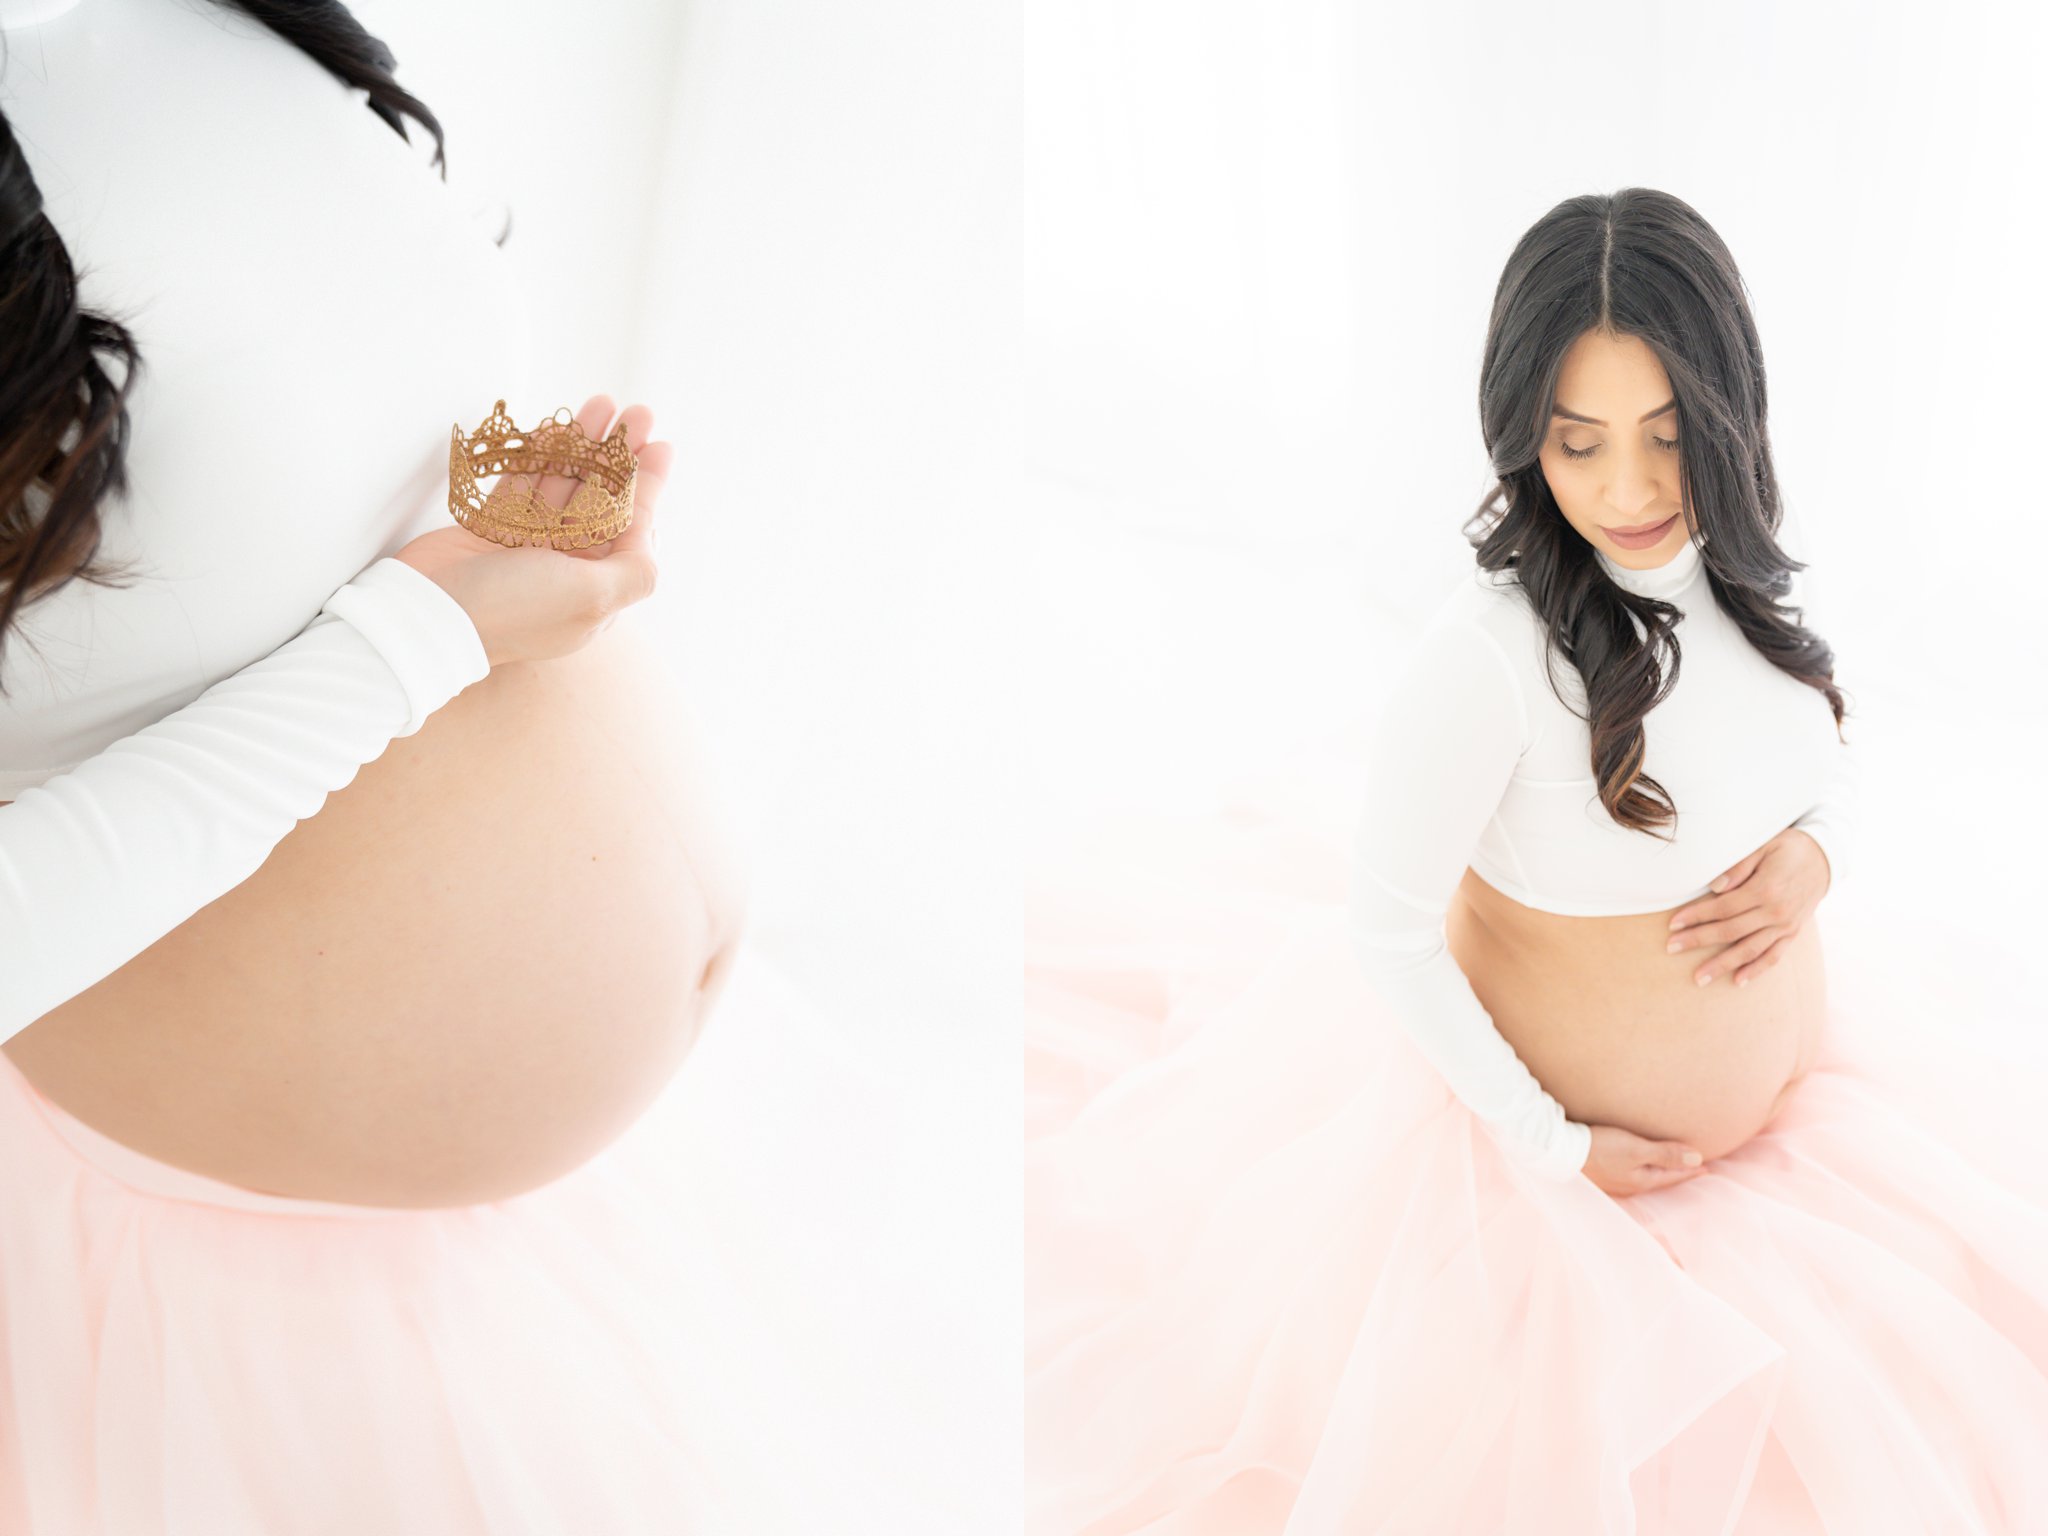 Expecting mom being photographed in jupiter florida photography studio wearing a maxi dress.